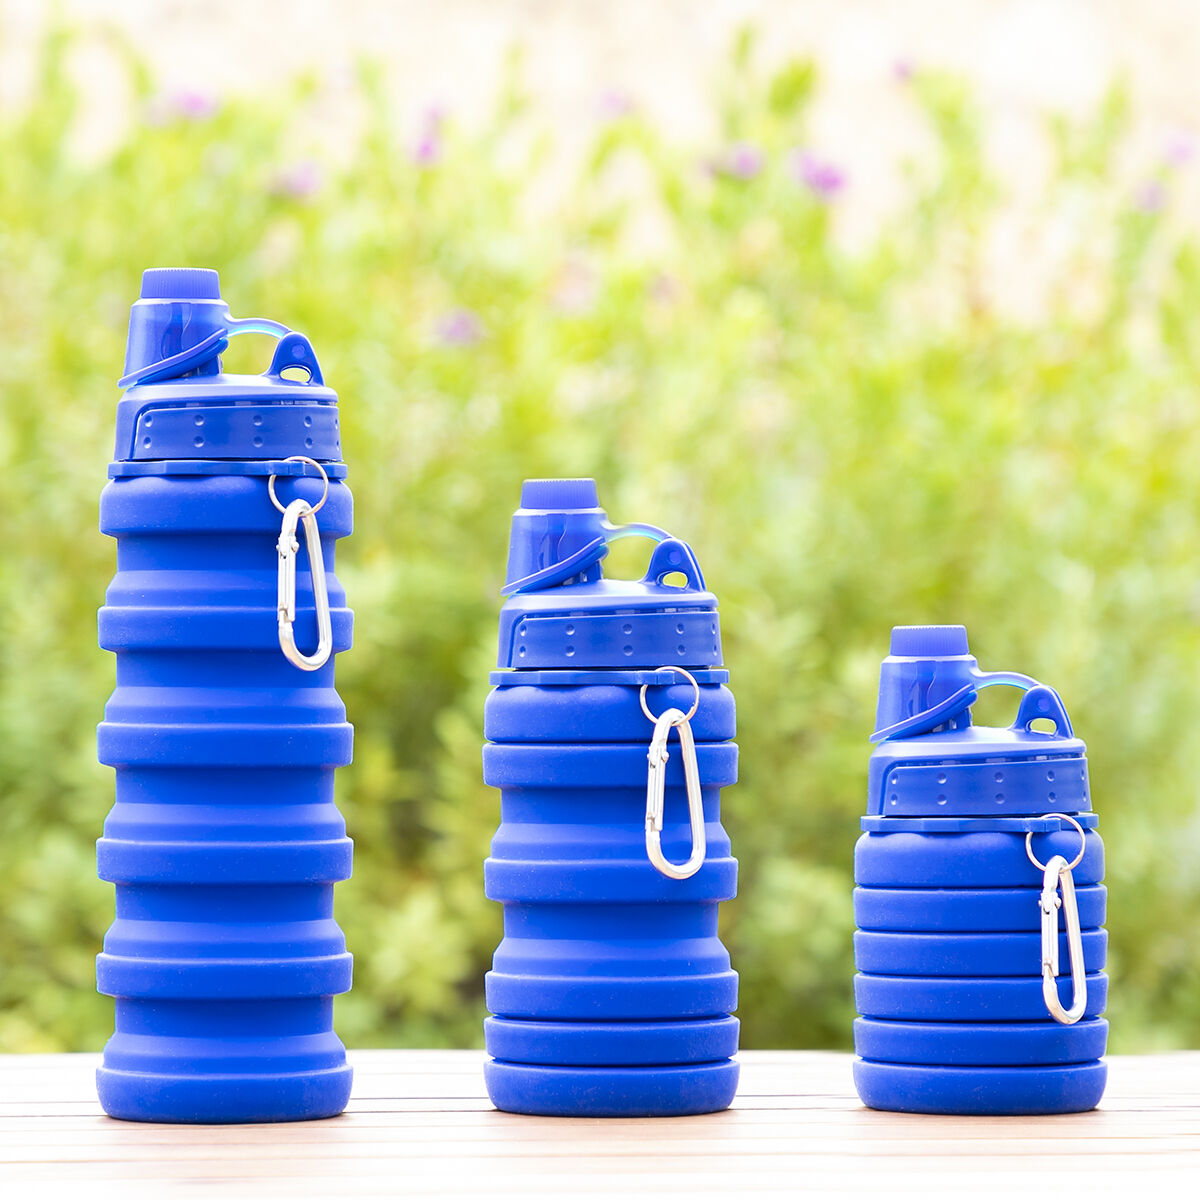 Silicone Collapsible Bottle